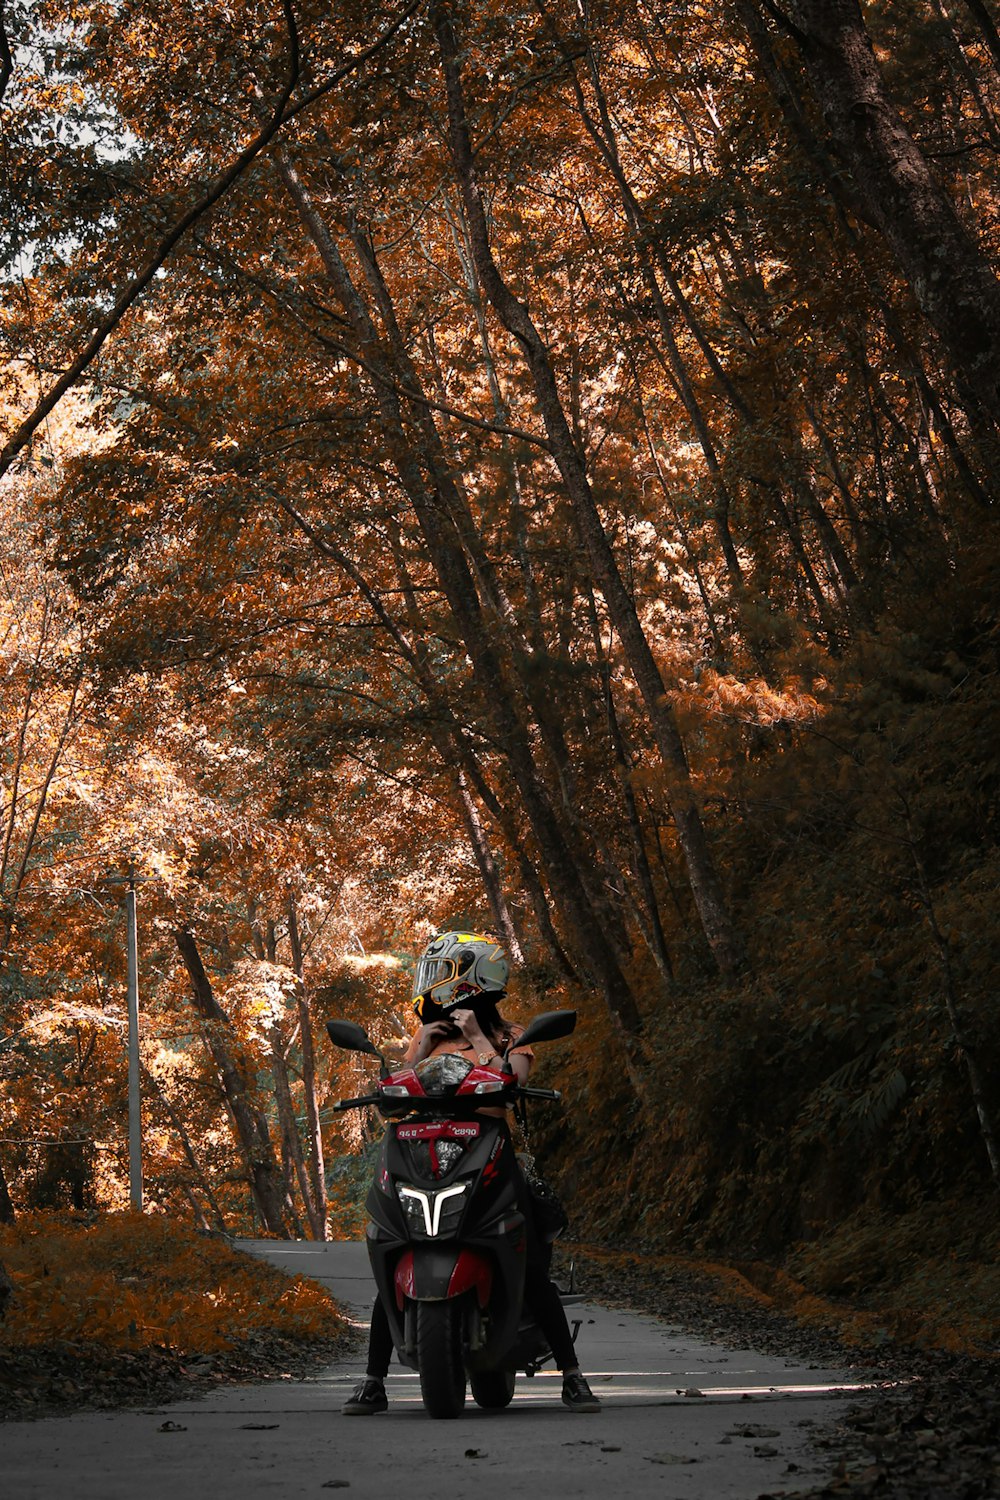 man in red and black motorcycle helmet riding motorcycle in forest during daytime